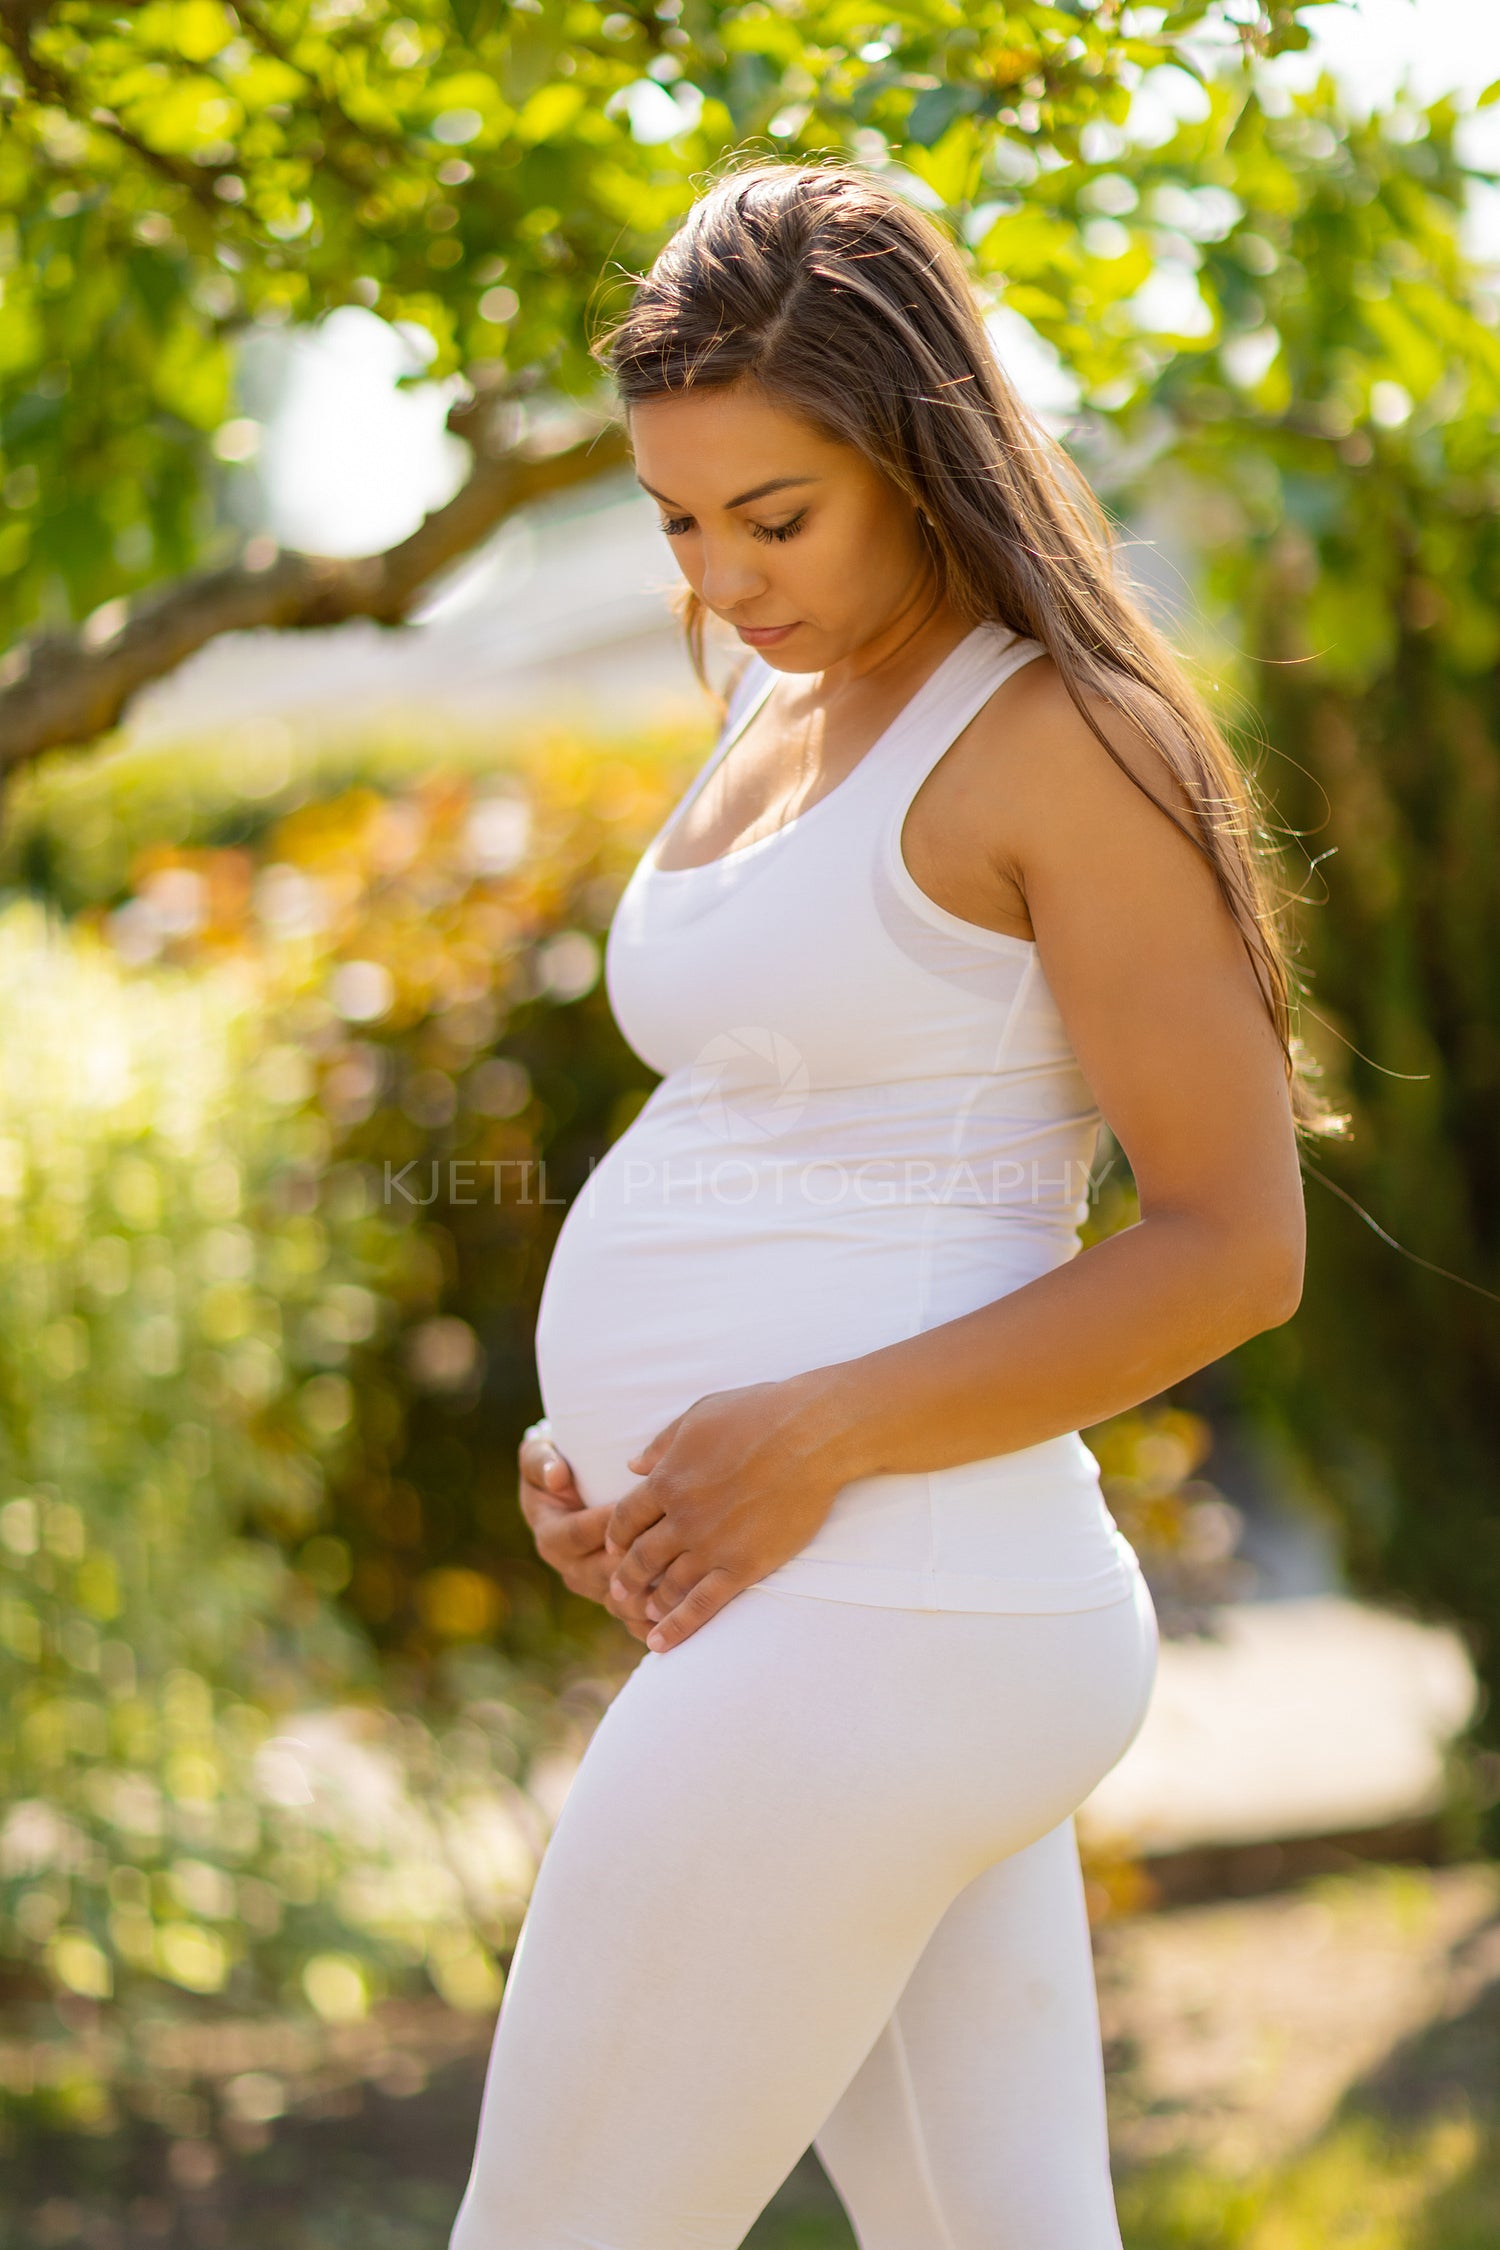 Pregnant woman standing in garden looking down at her belly